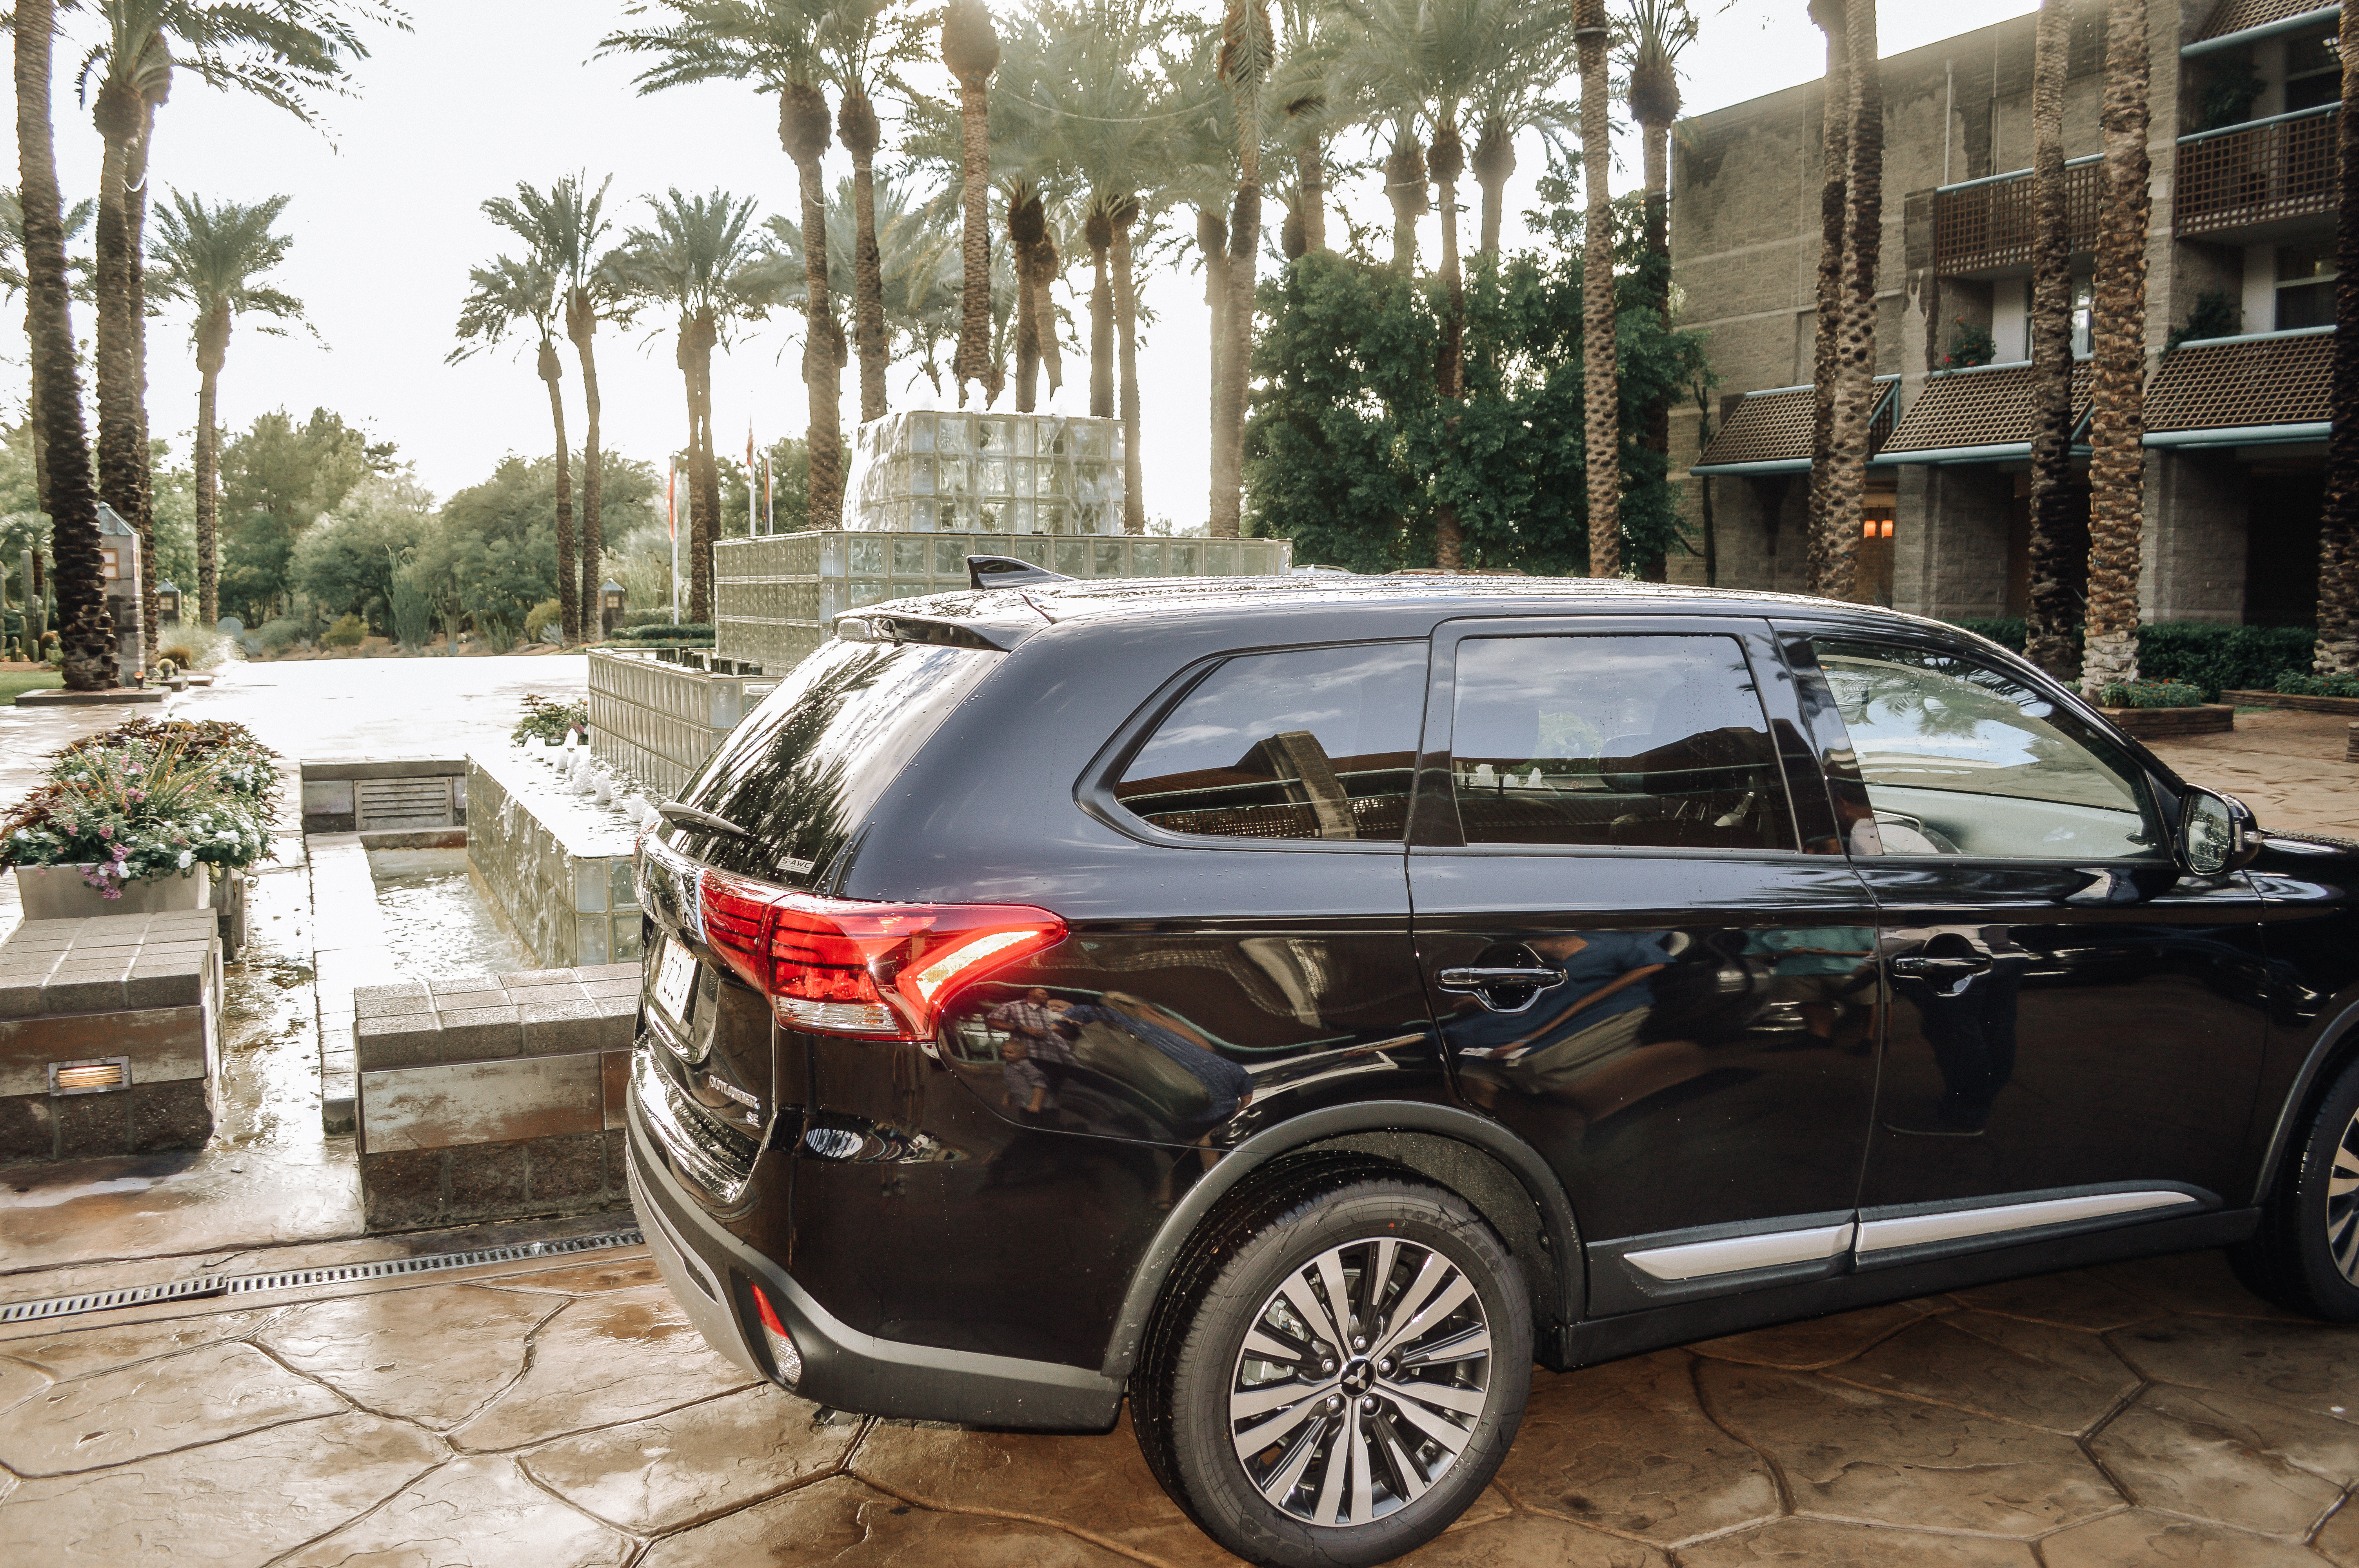 Mitsubishi Outlander GT | The Best Phoenix Travel Guide featured by top Denver travel guide, All Things Lovely